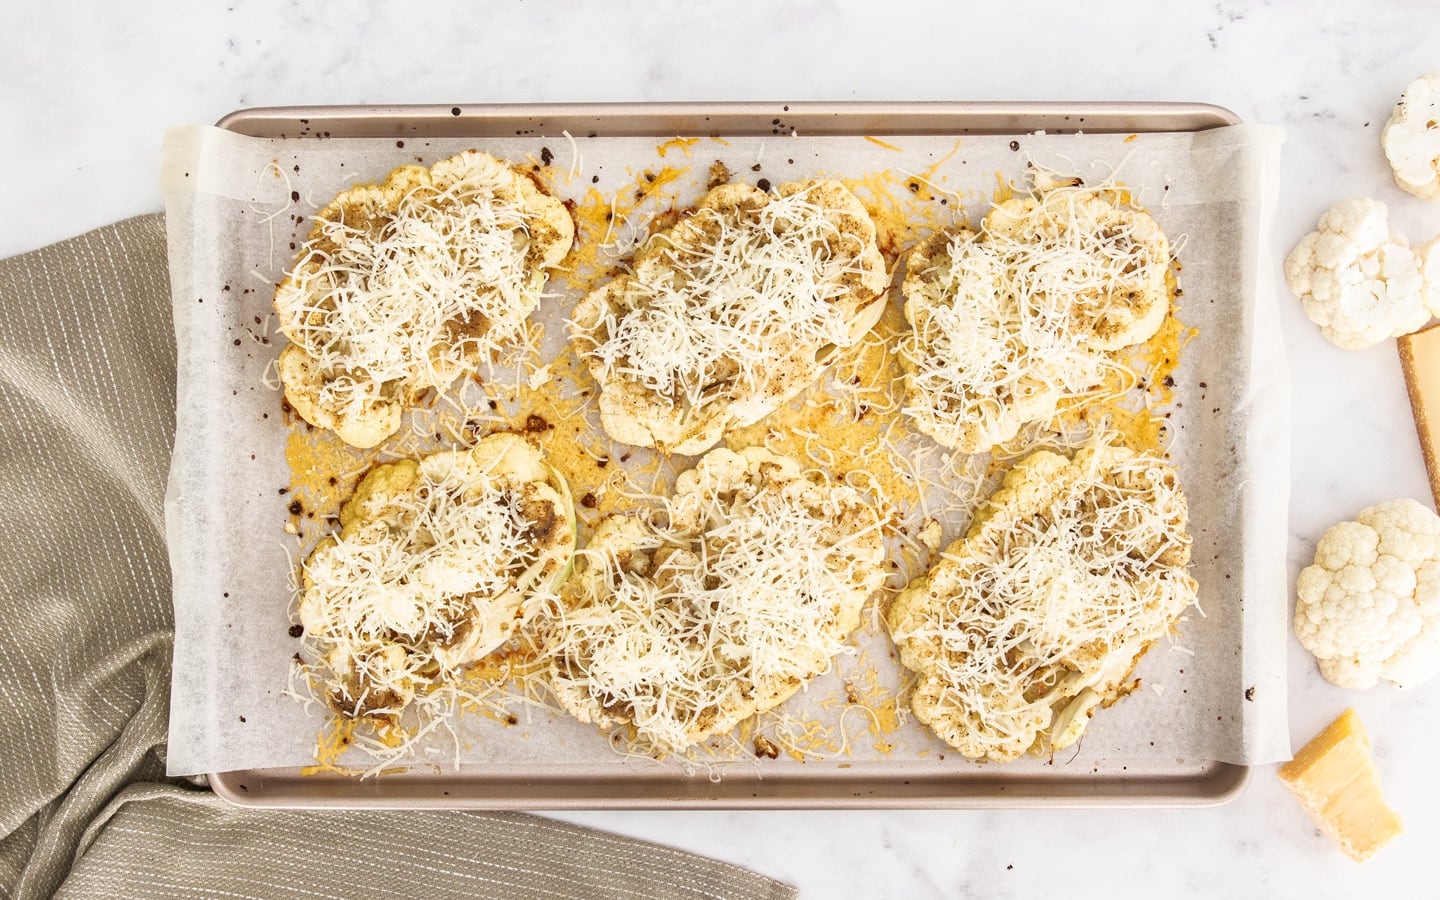 Cauliflower steaks topped with chees on a baking sheet.